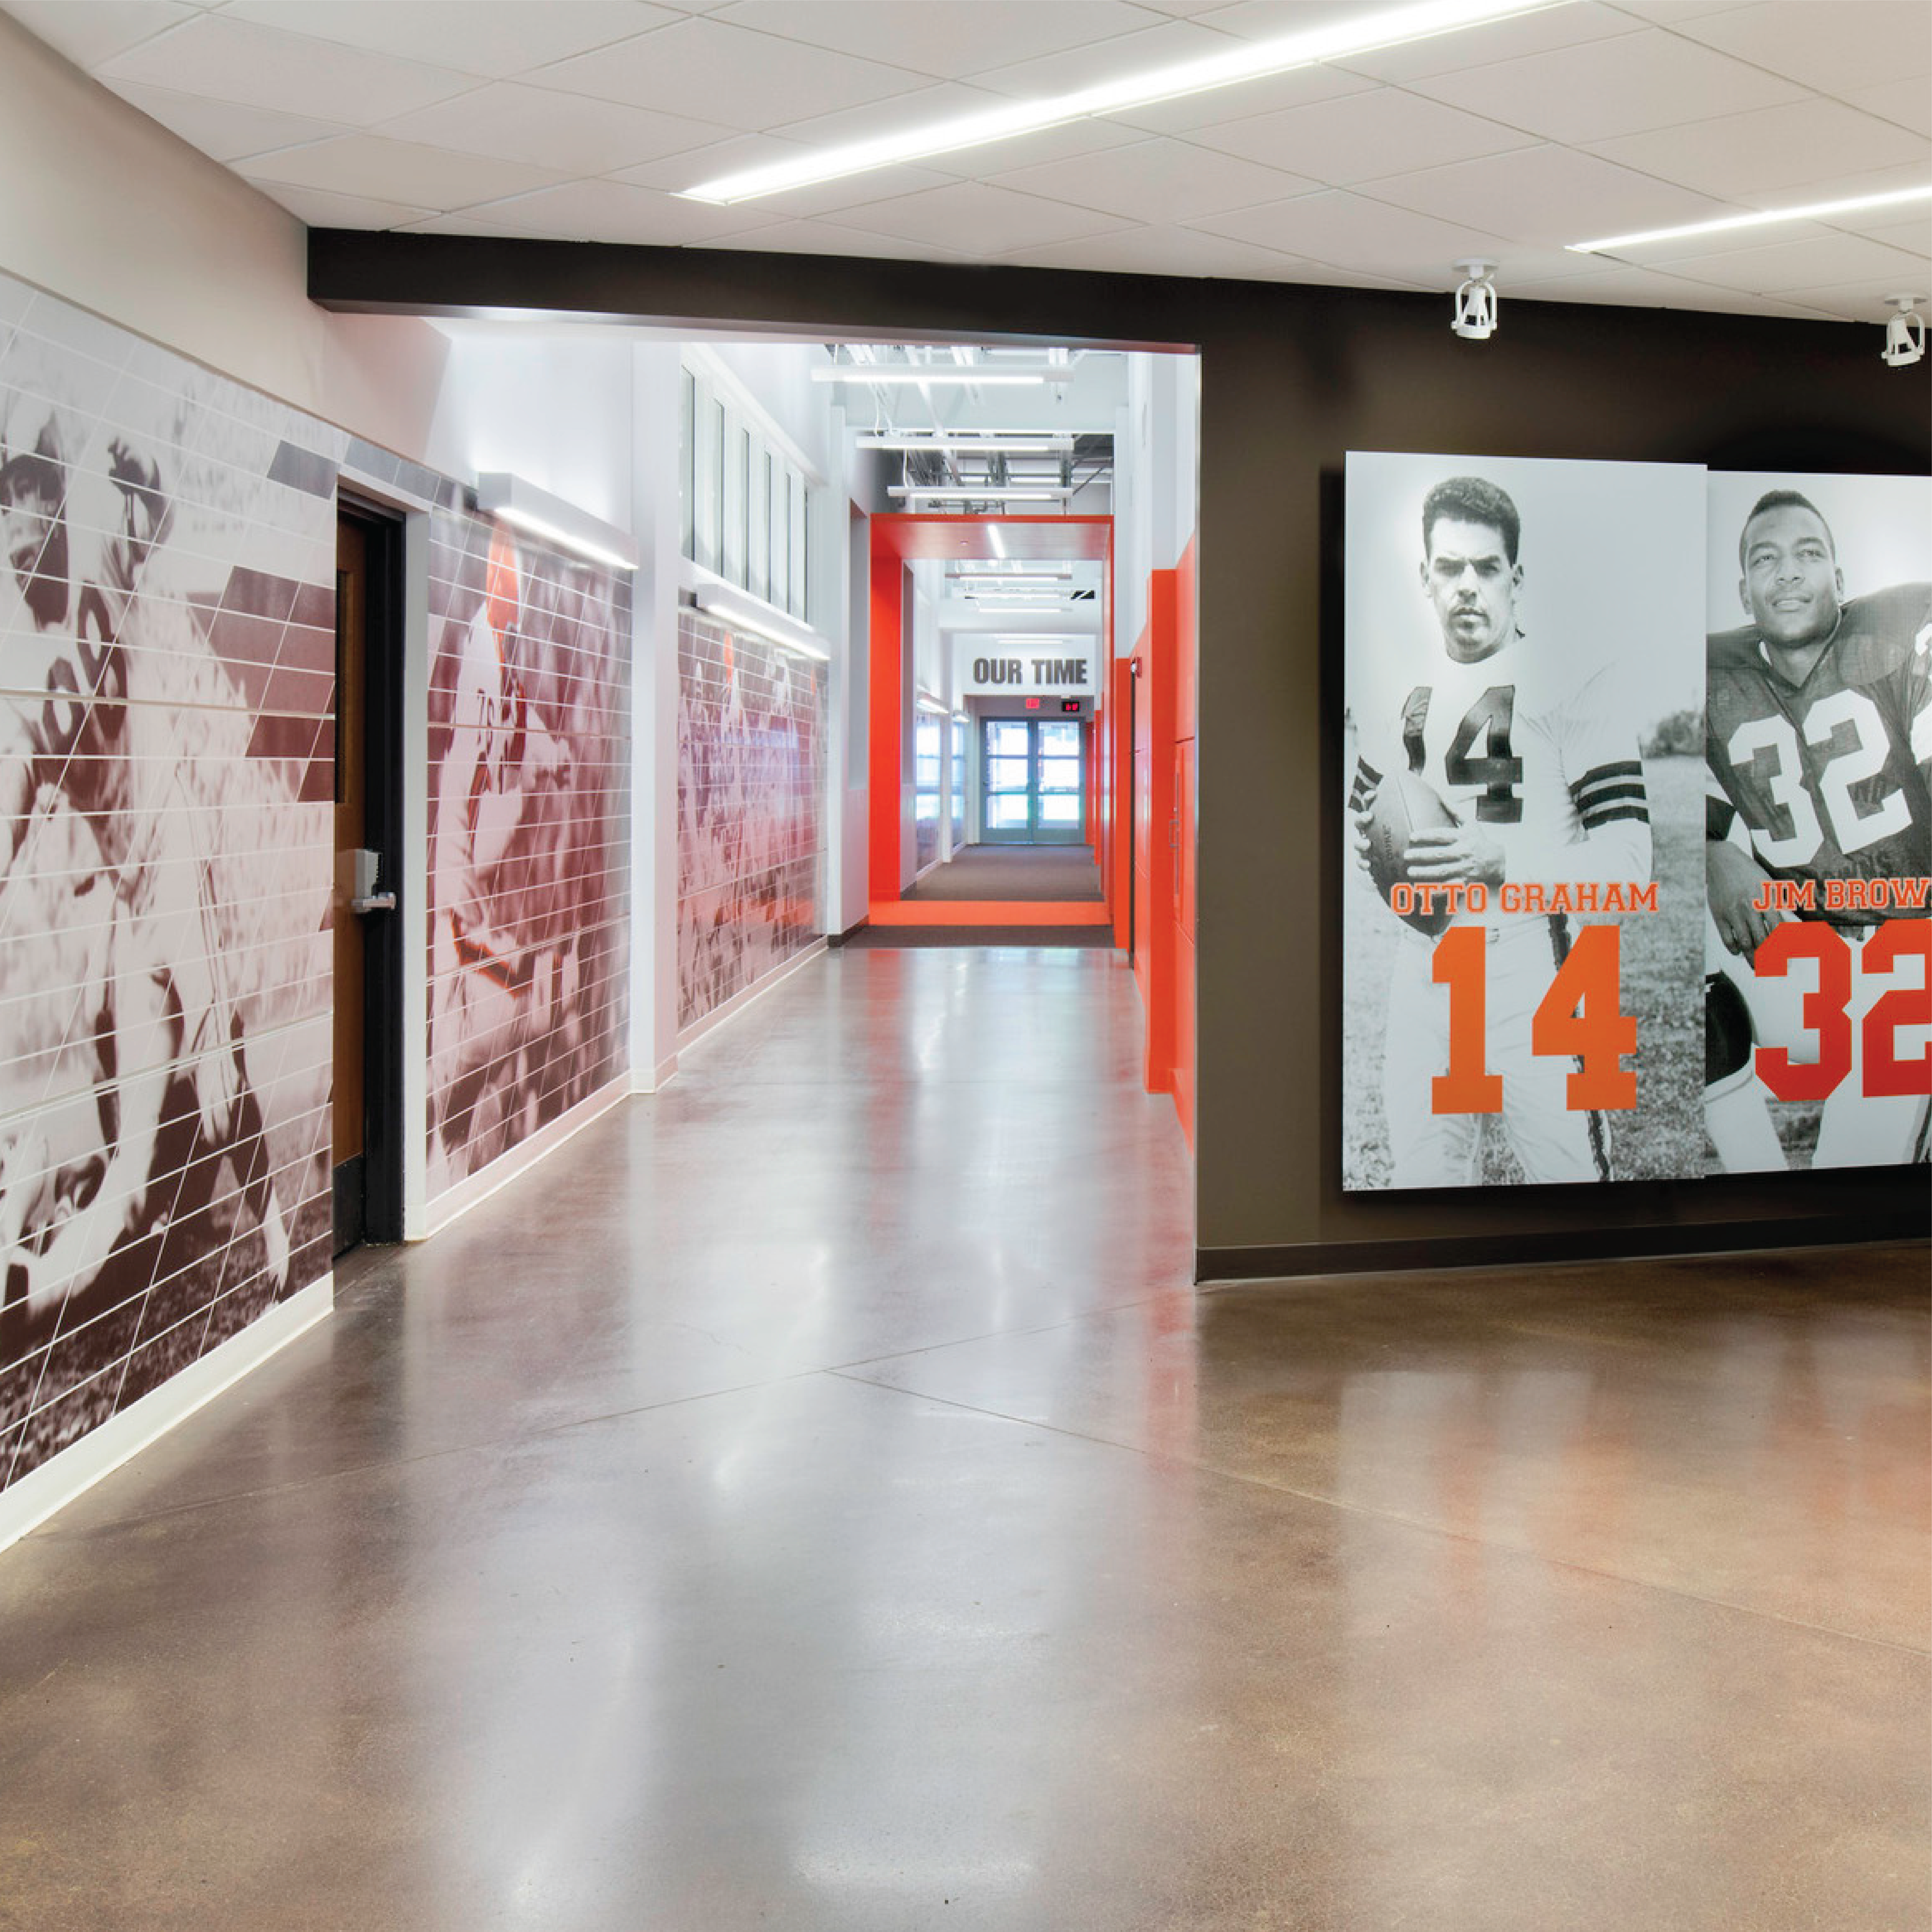 Wall Graphics printed and installed by CS for the Cleveland Browns